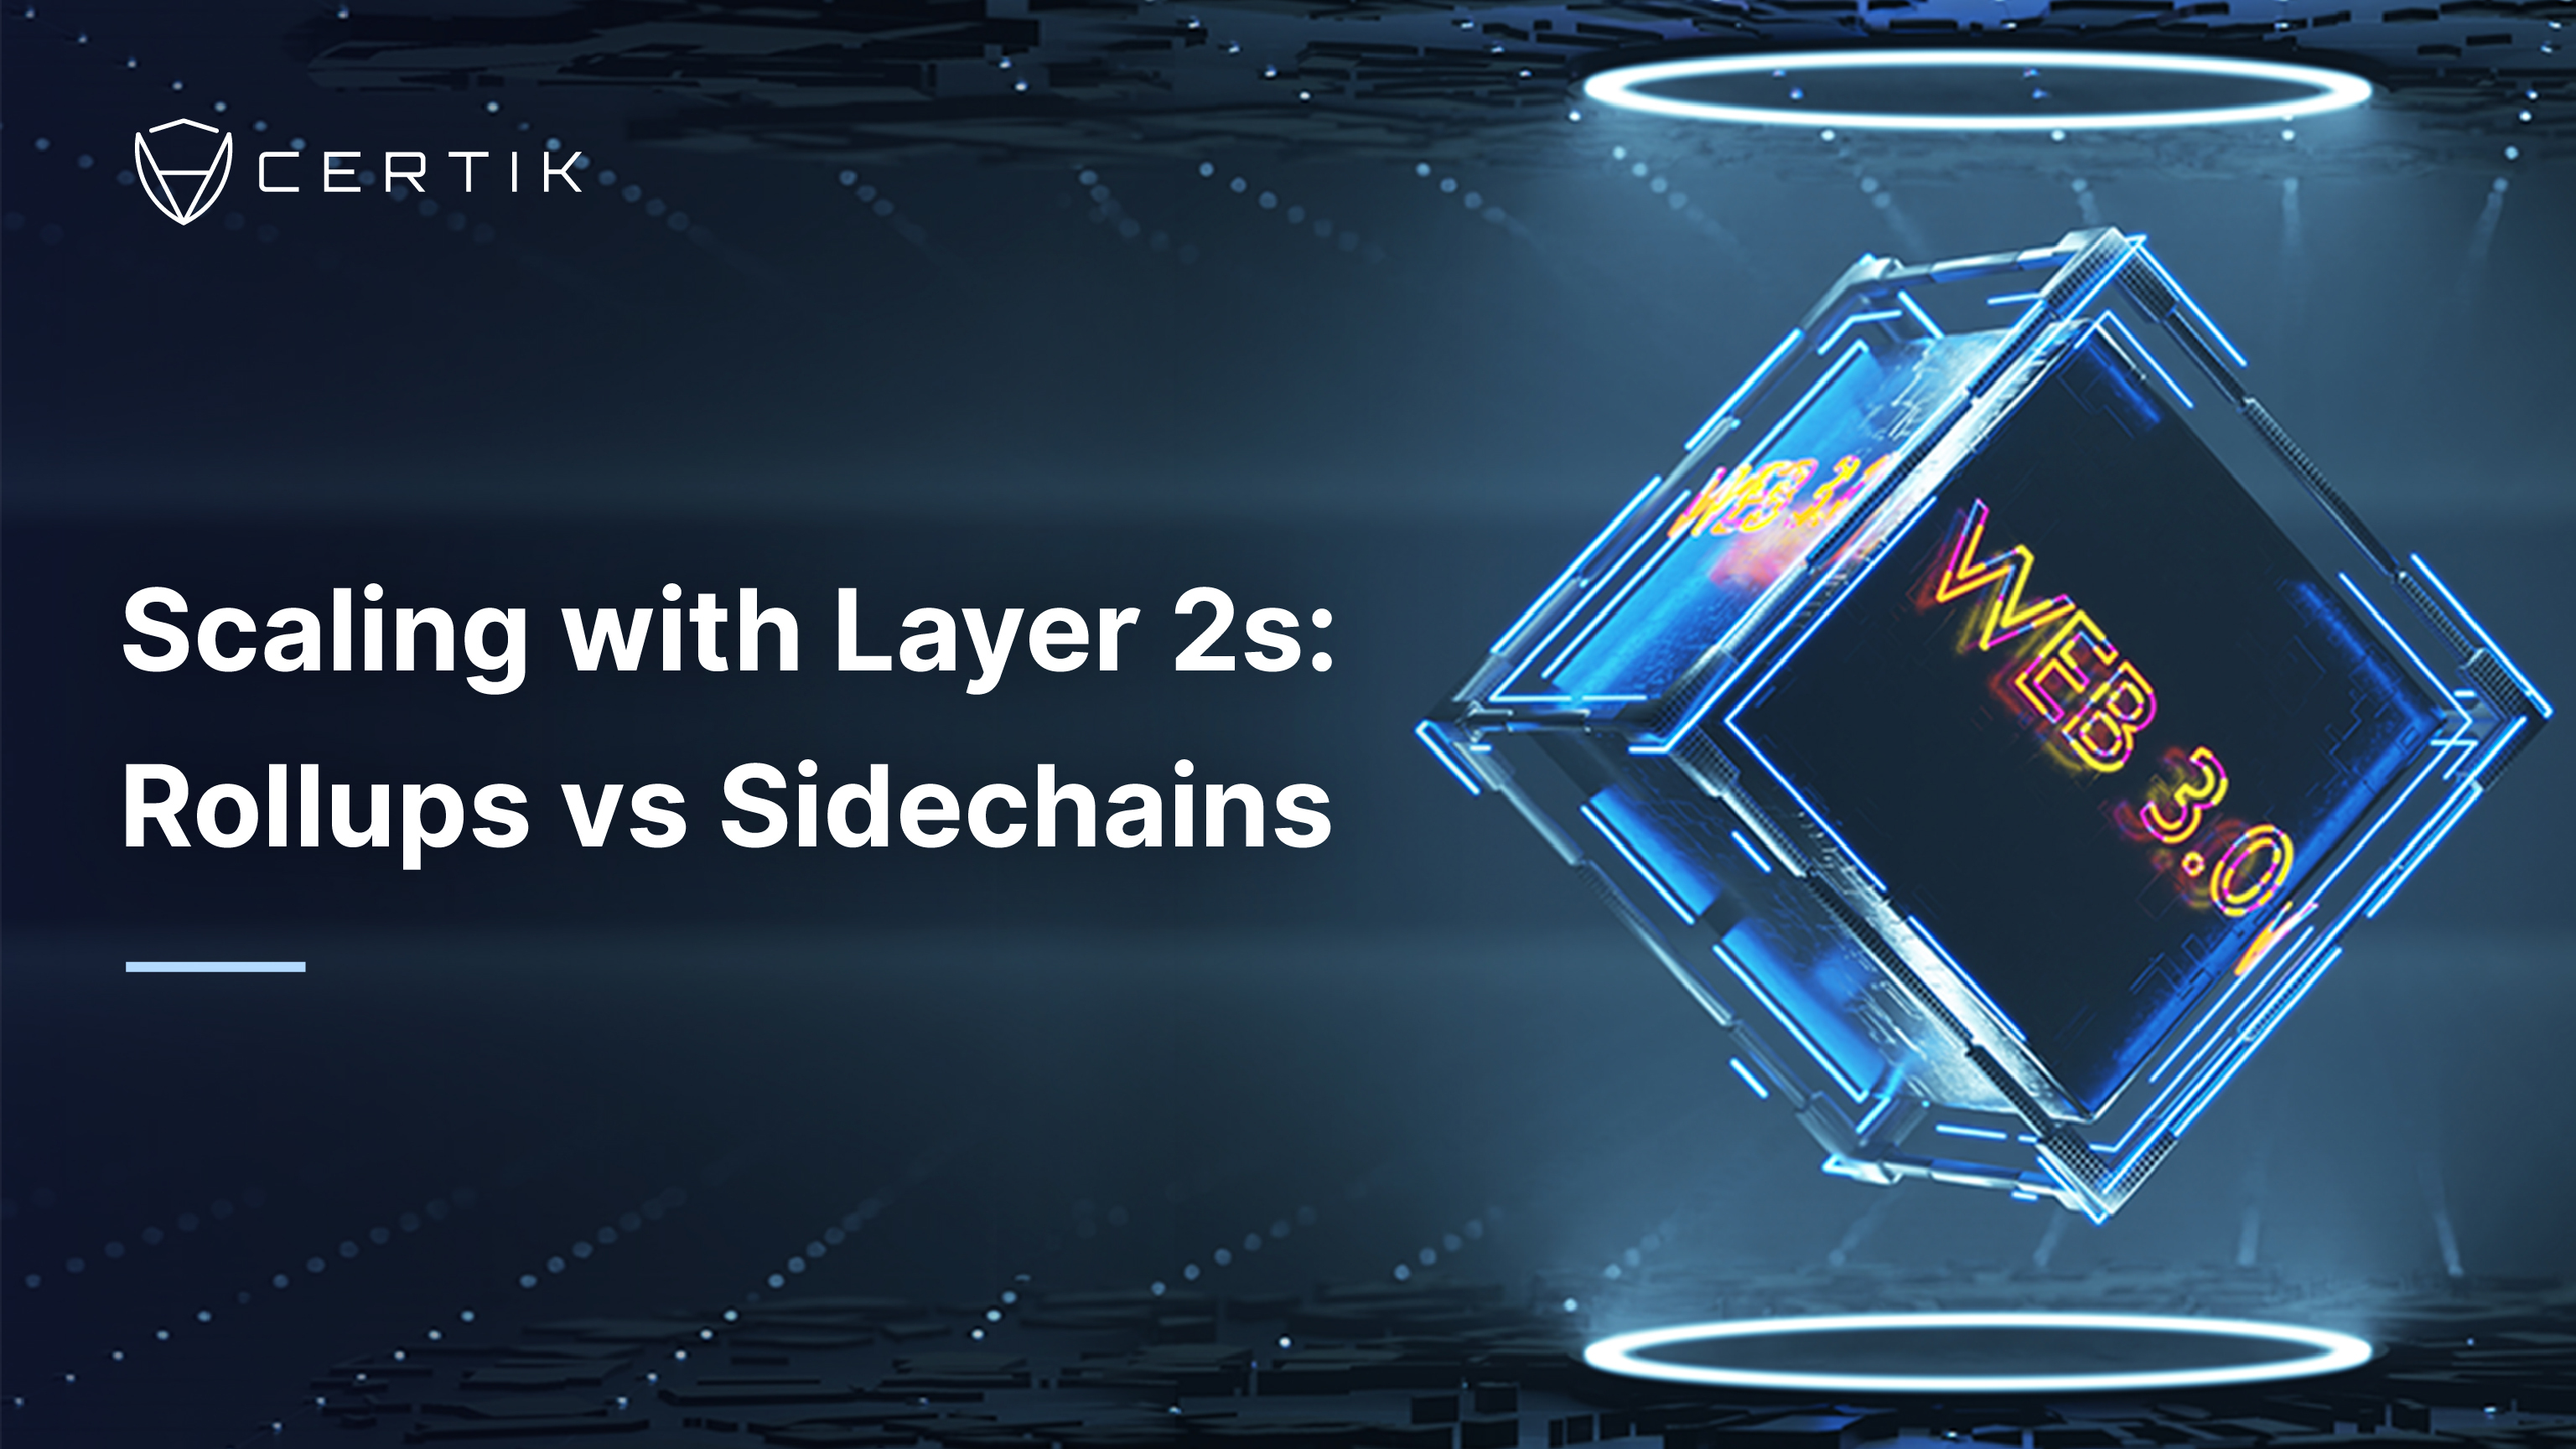 Scaling with Layer 2s: Rollups vs Sidechains